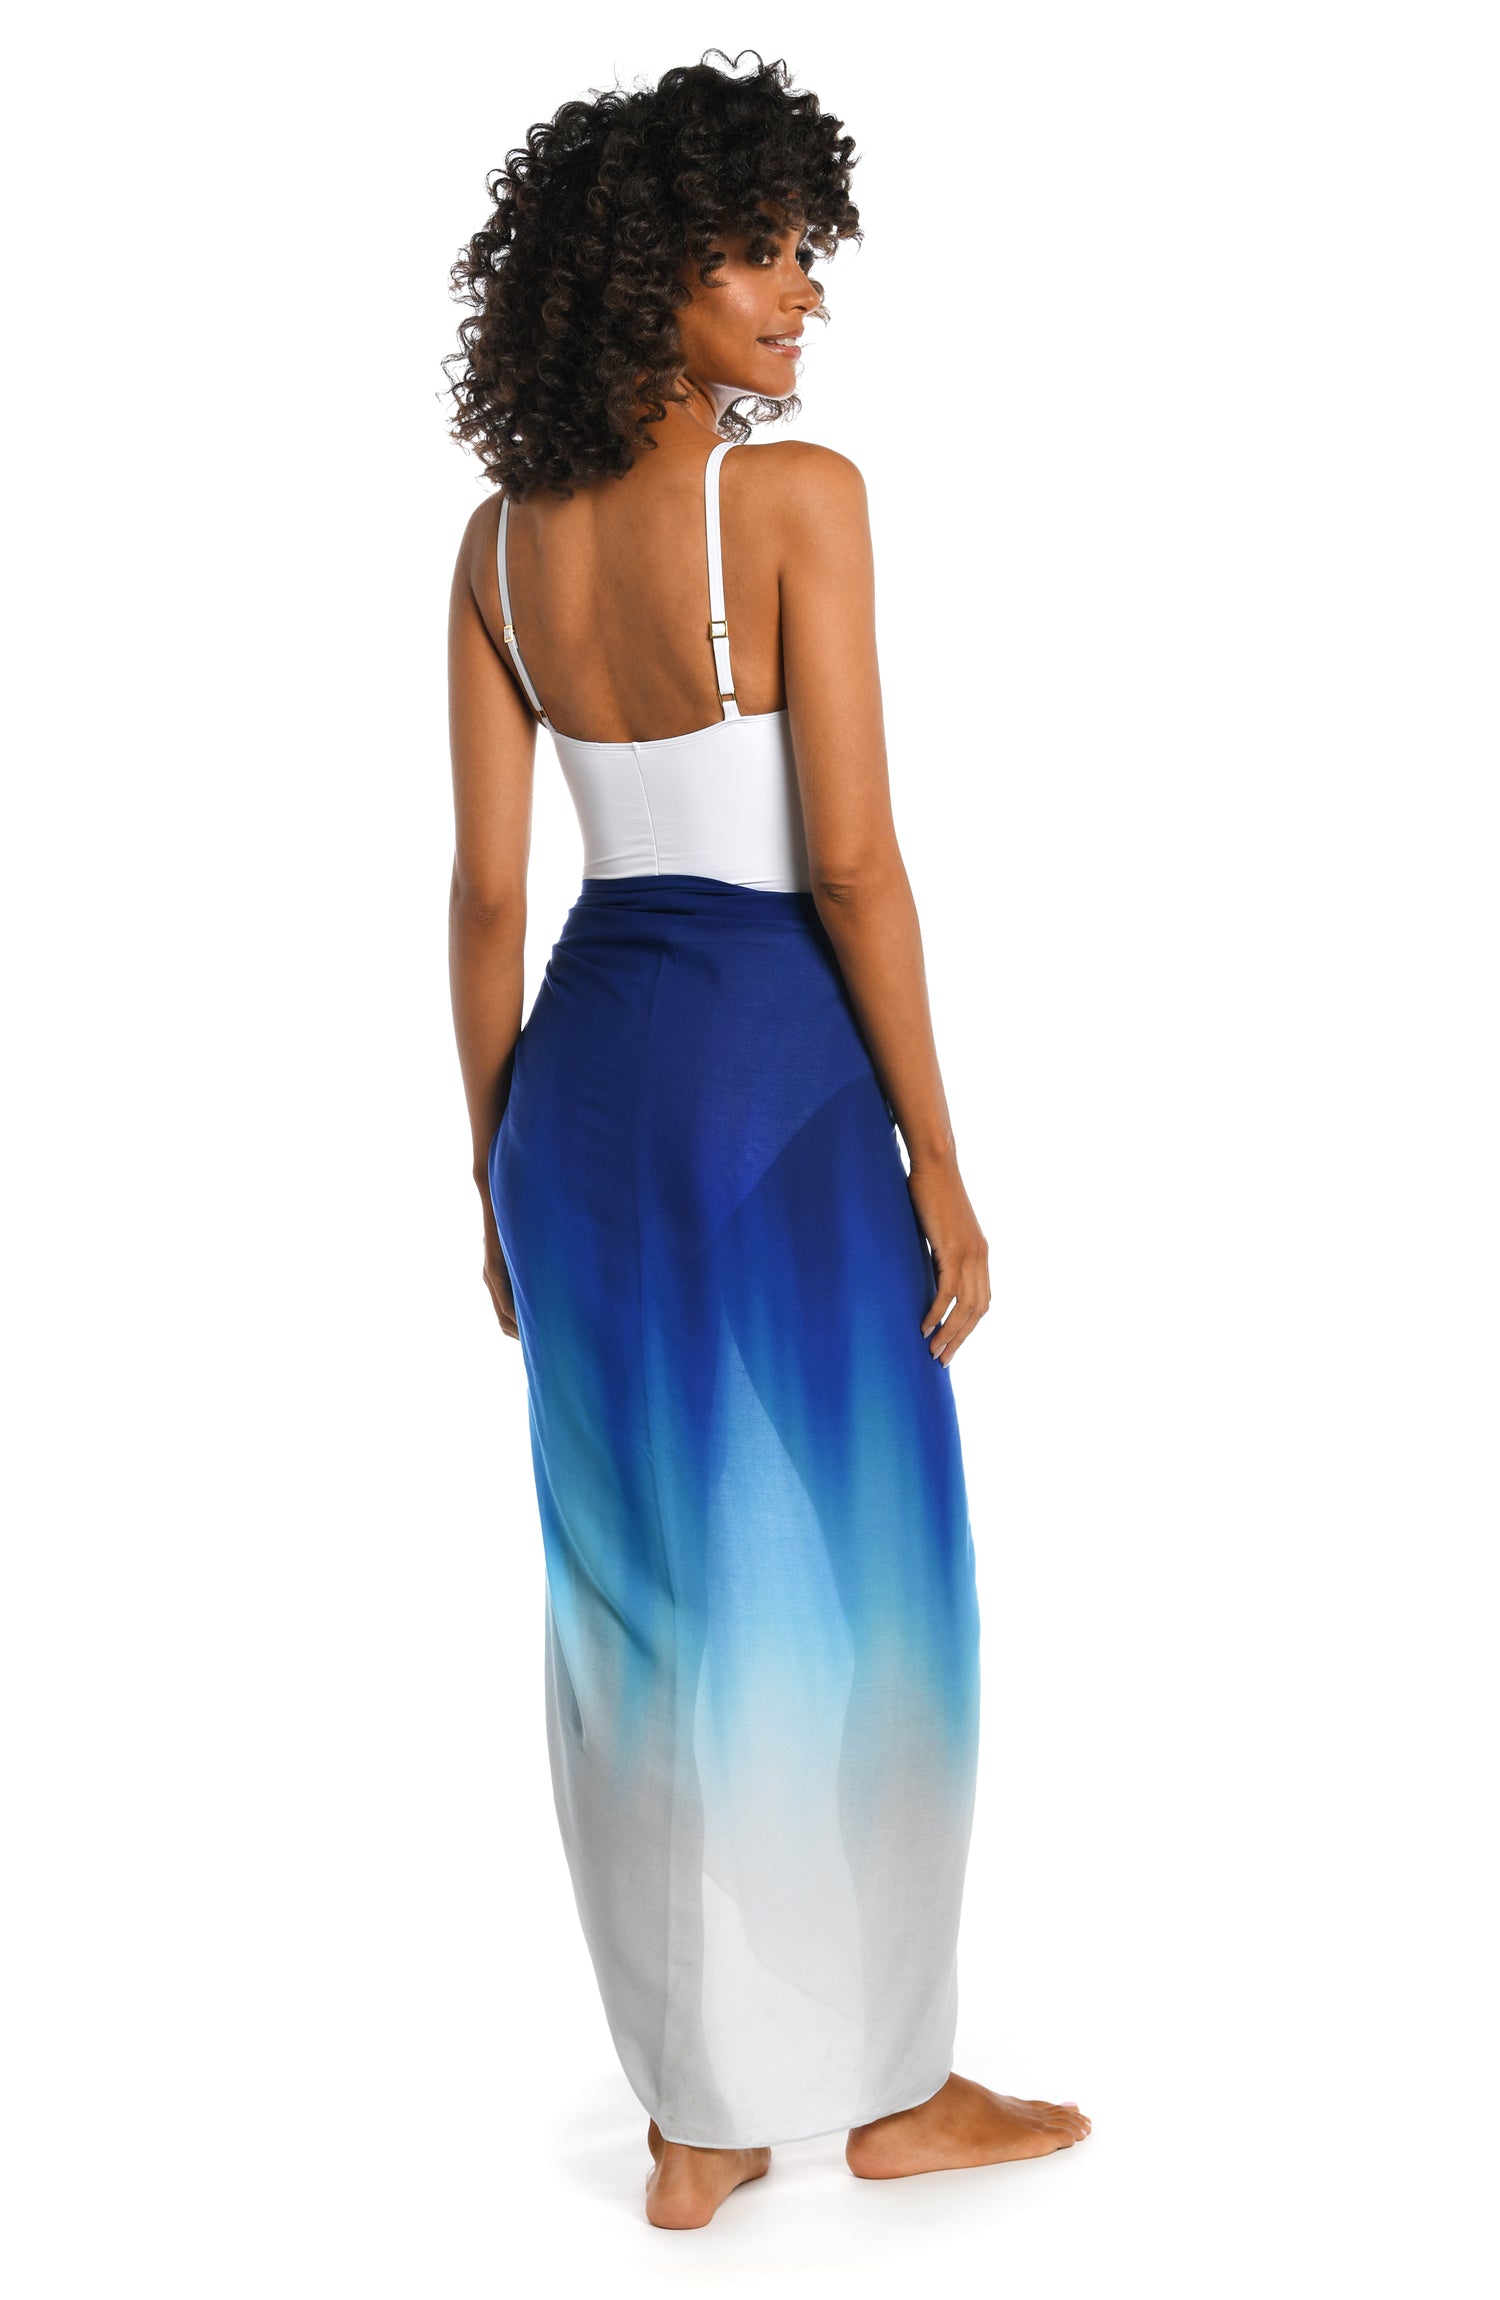 Model is wearing a sapphire colored ombre printed sarong pareo cover up from our Ocean Oasis collection!